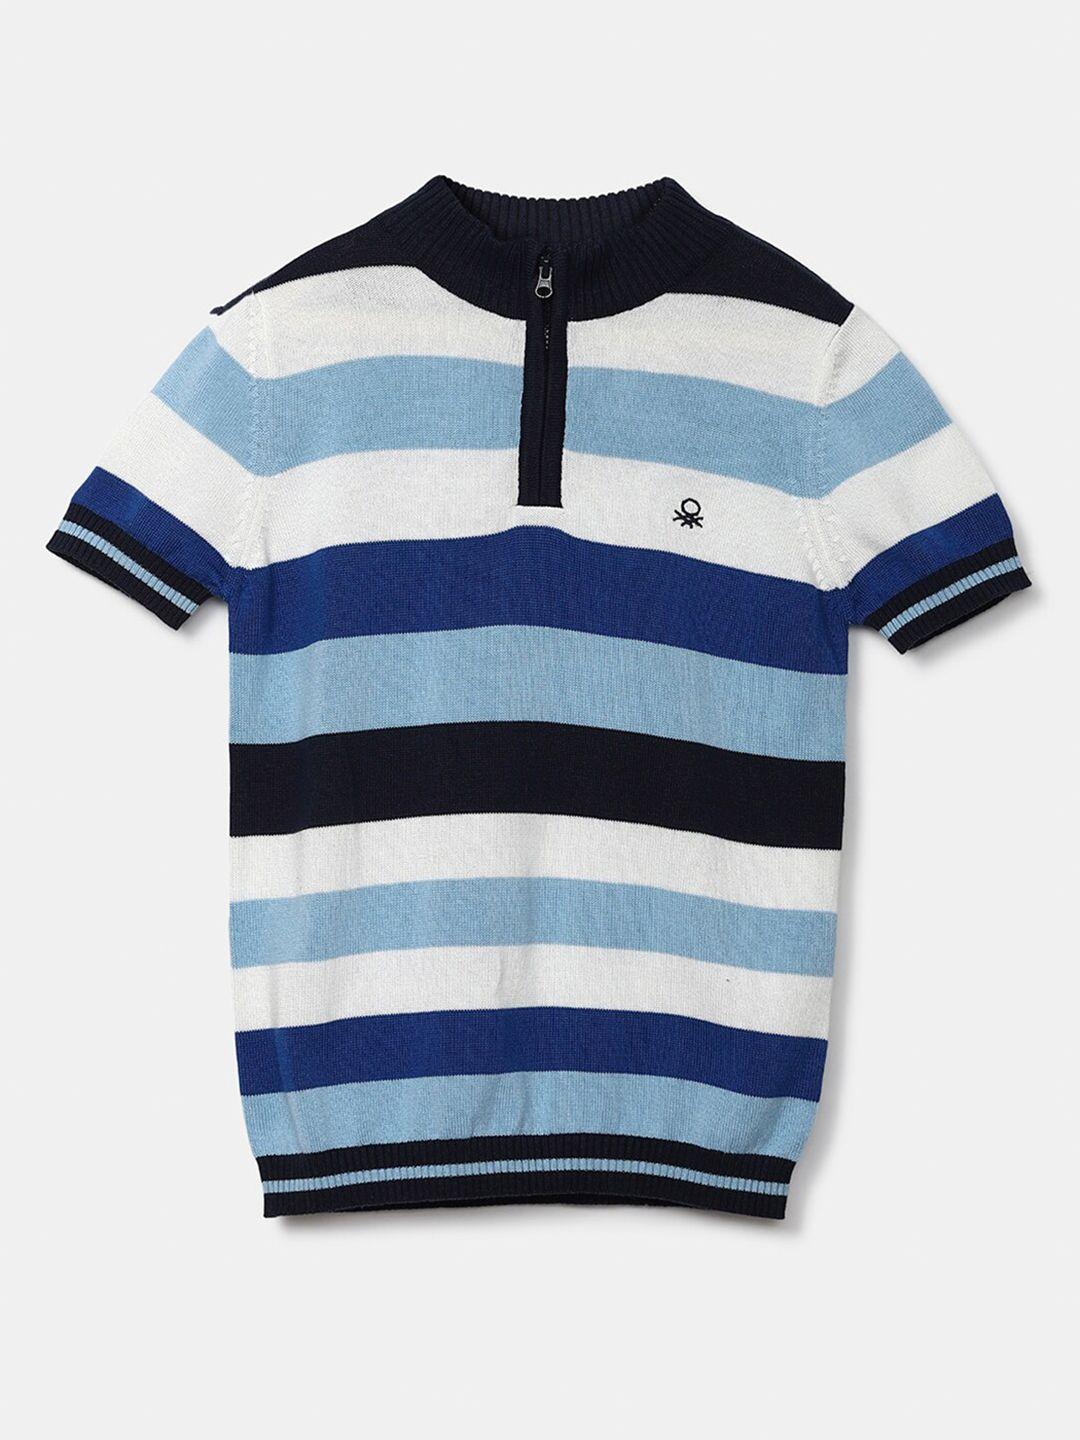 united colors of benetton boys blue & white striped pullover